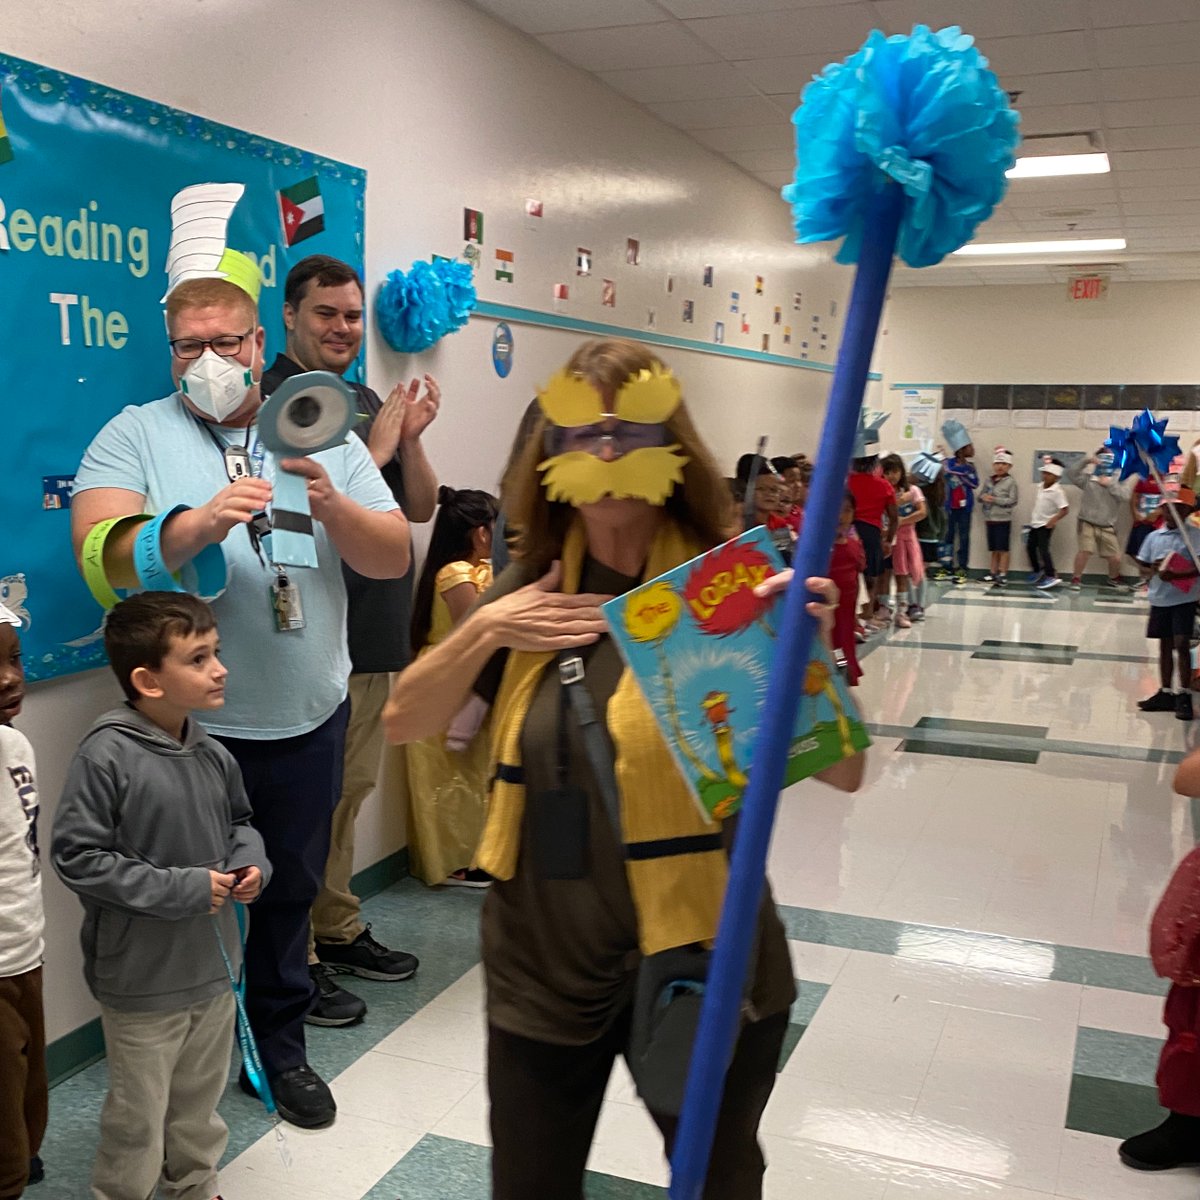 Yesterday @lgeseaturtles celebrated Literacy Week with a character parade.  Students dressed as their favorite book character. What fun!  #LiteracyWeek #ccpsfamily